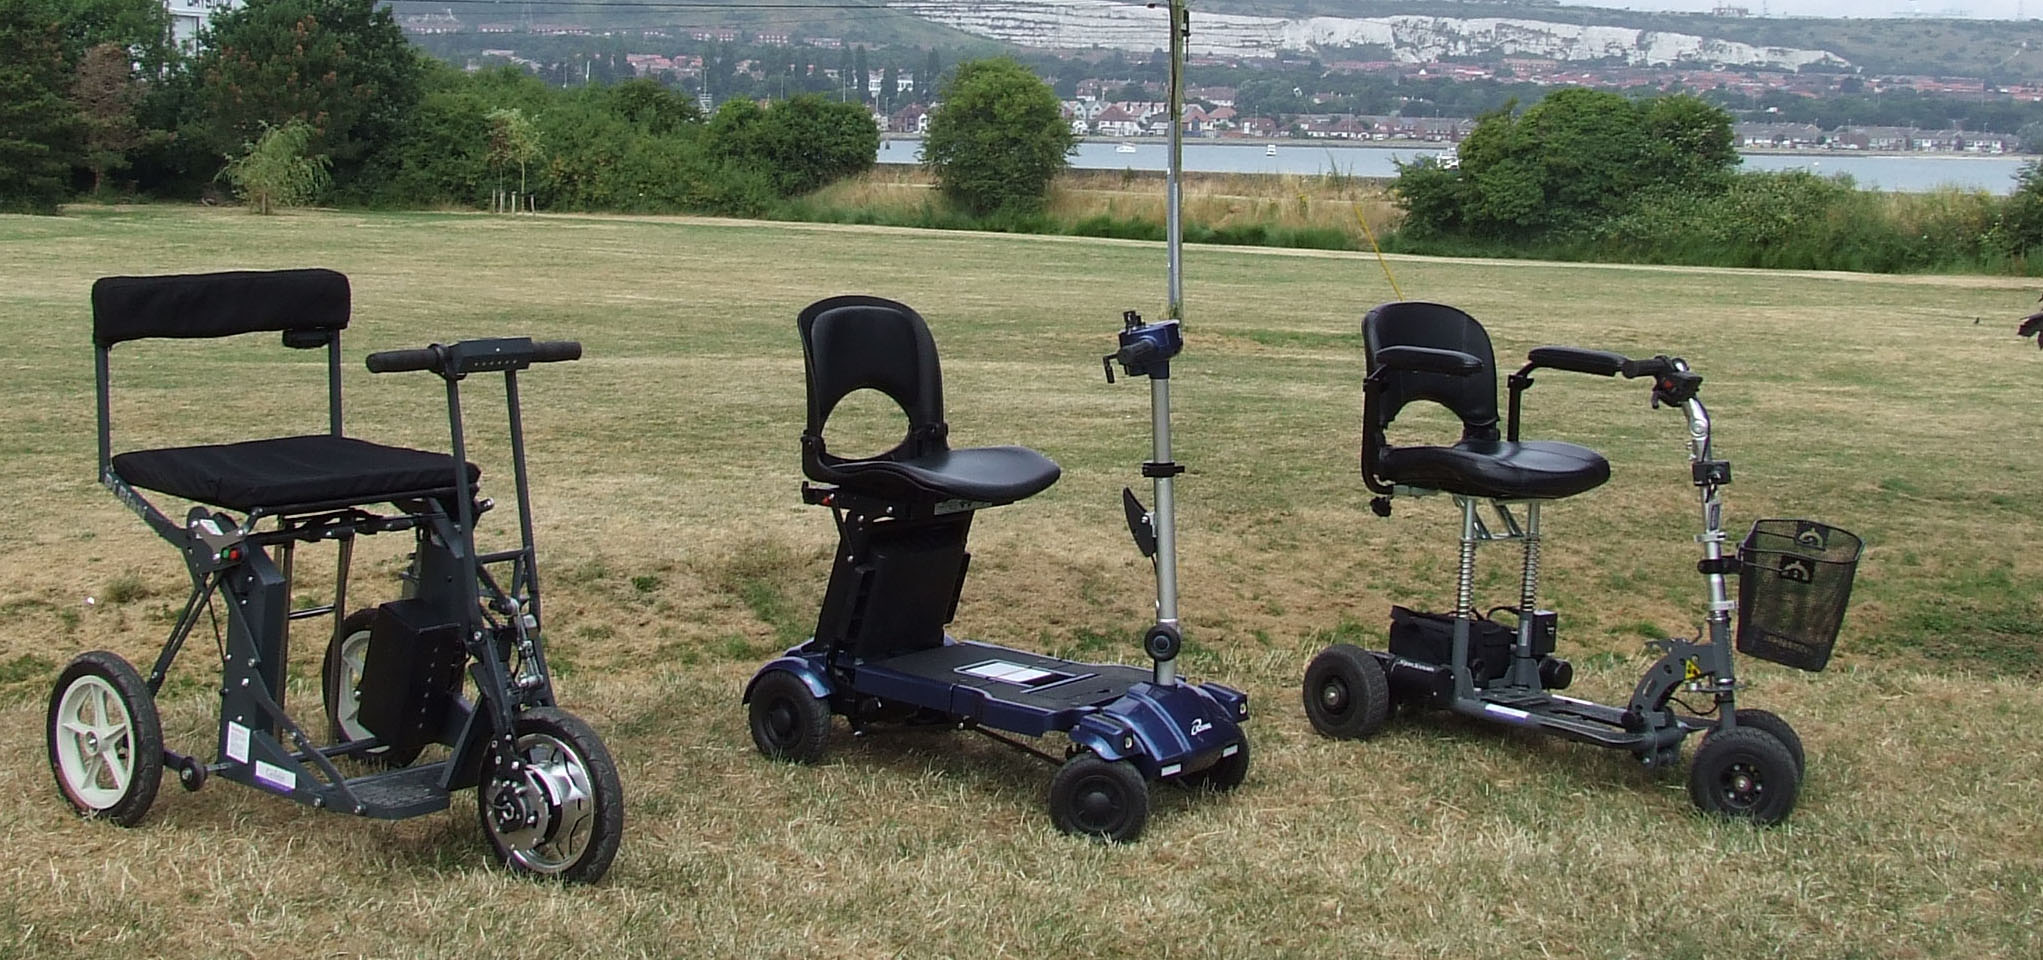 Three lightweight mobility scooters side-by-side